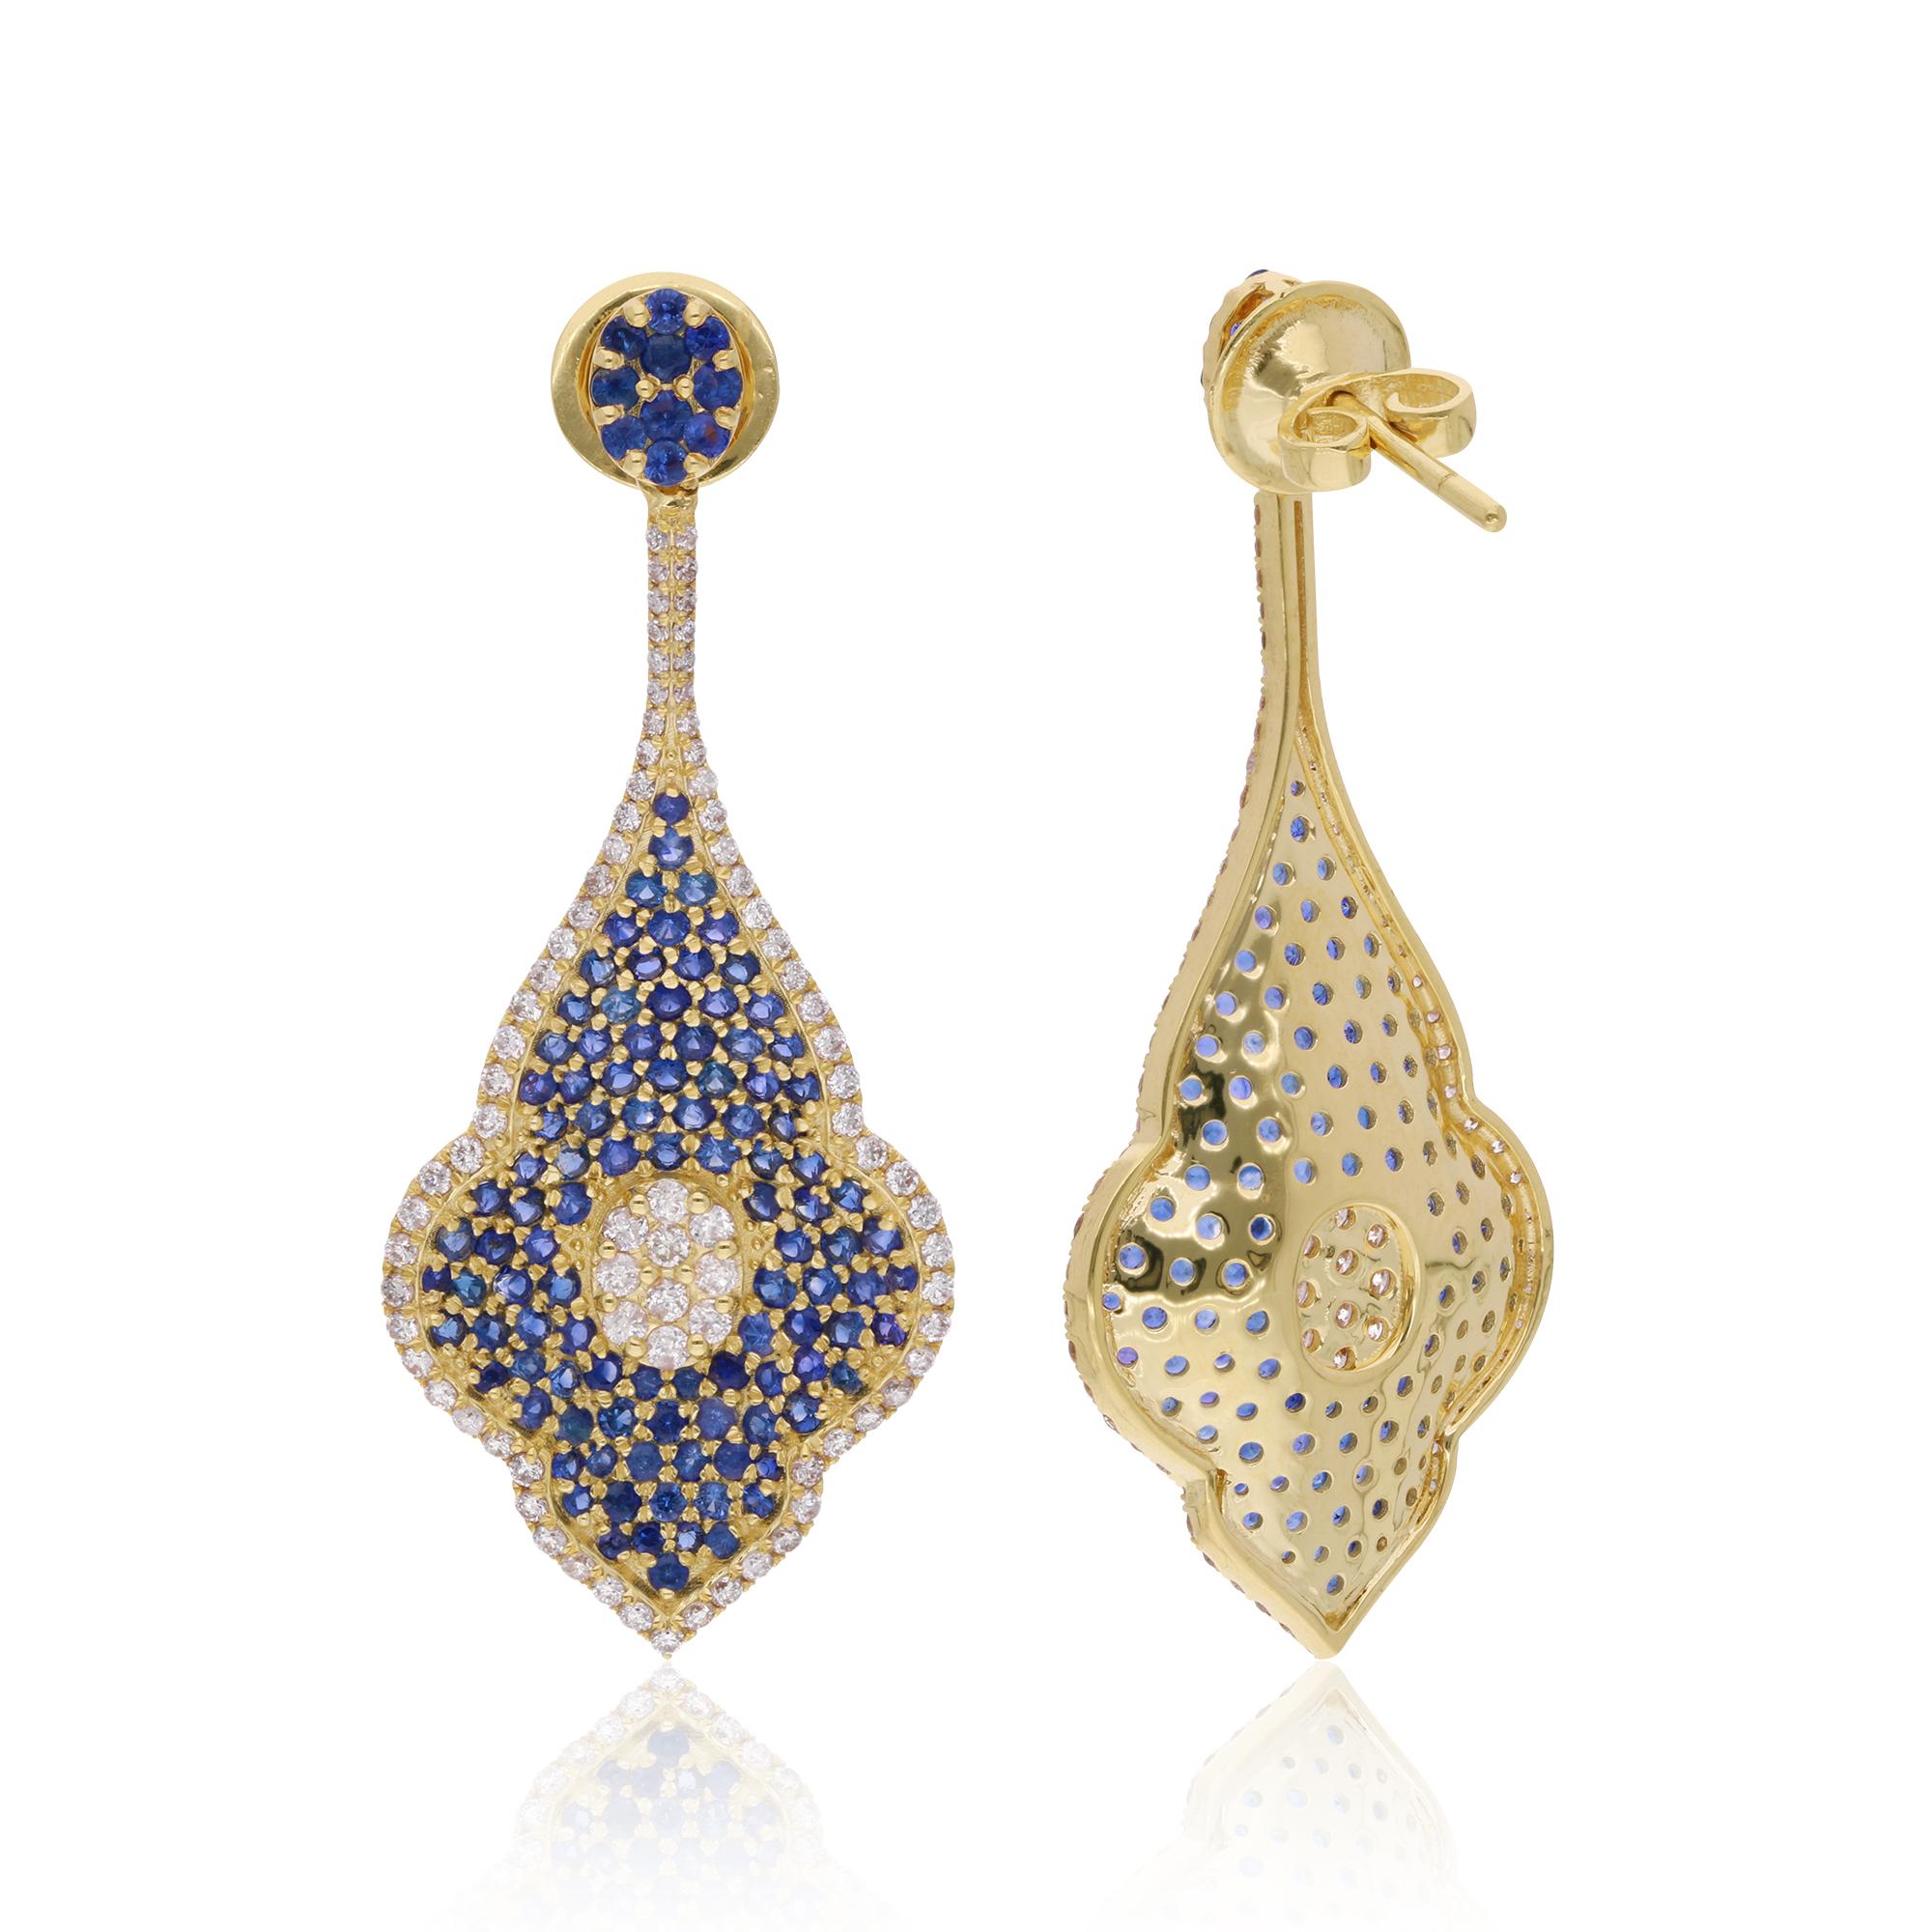 A dazzling touch of Blue Sapphire over the 18k Yellow Gold base which adds up to the elegance of the ornament. An elegant Earrings of adornment that would definitely grab attention!

✧✧Welcome To Our Shop Spectrum Jewels✧✧

